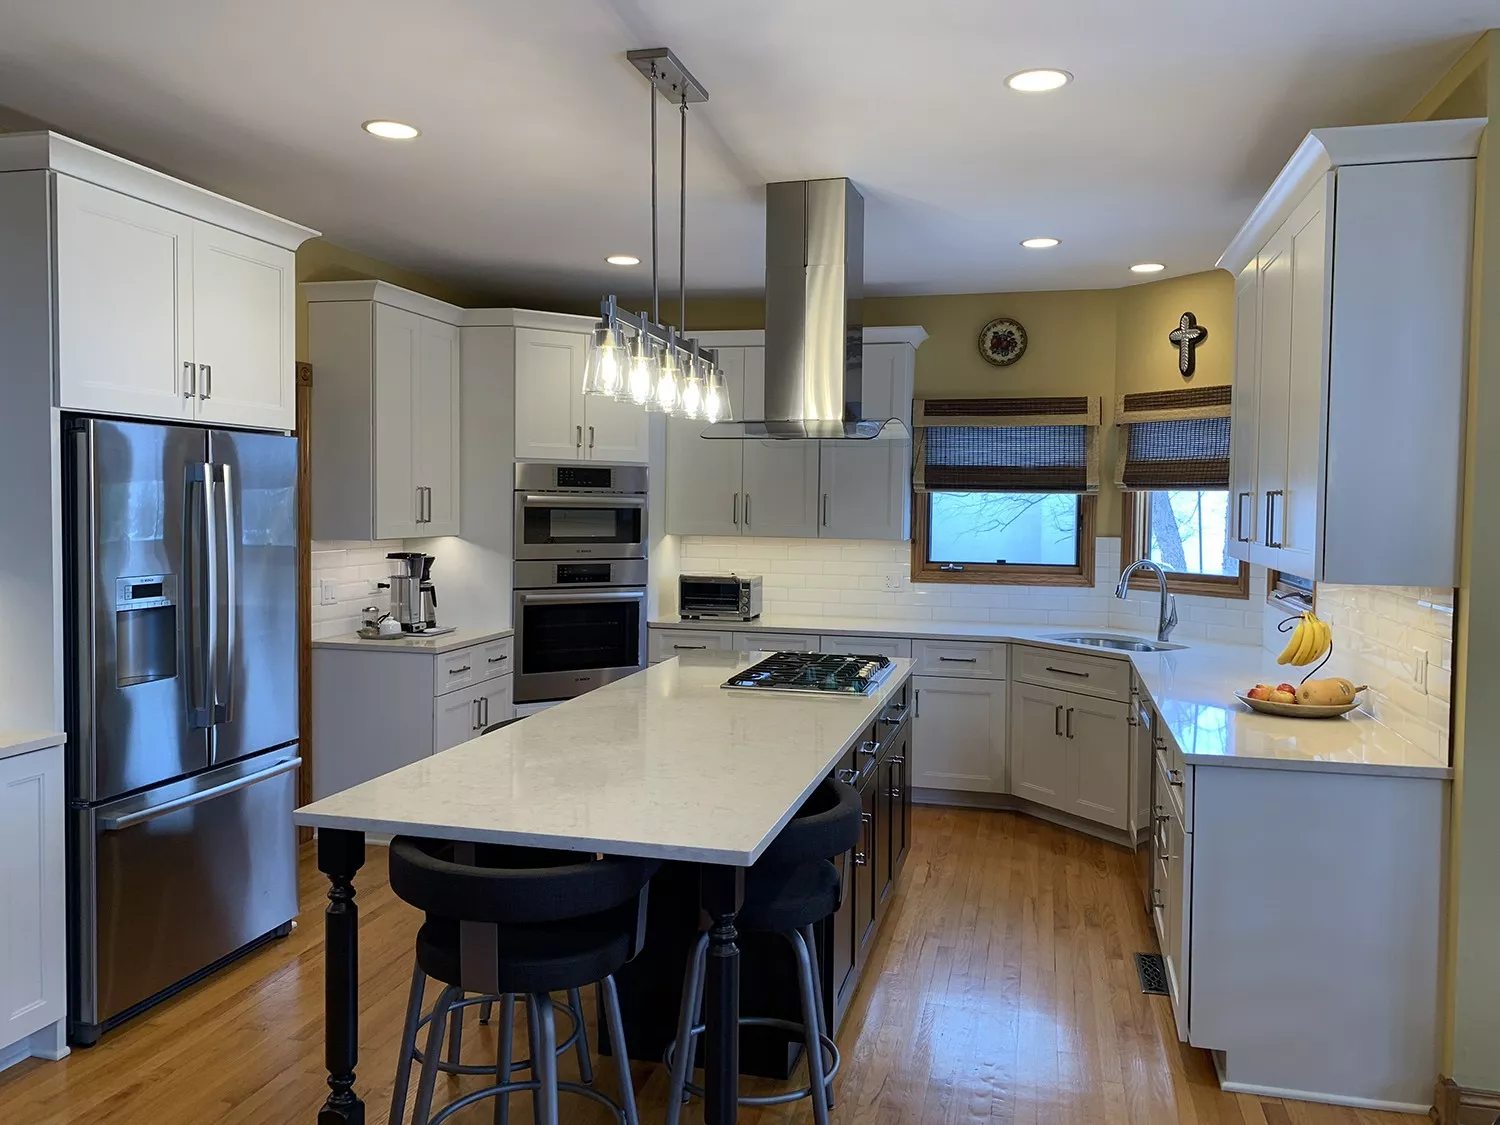 Kitchen with sink, cabinets, drawers, appliances, and an island with a built-in stovetop